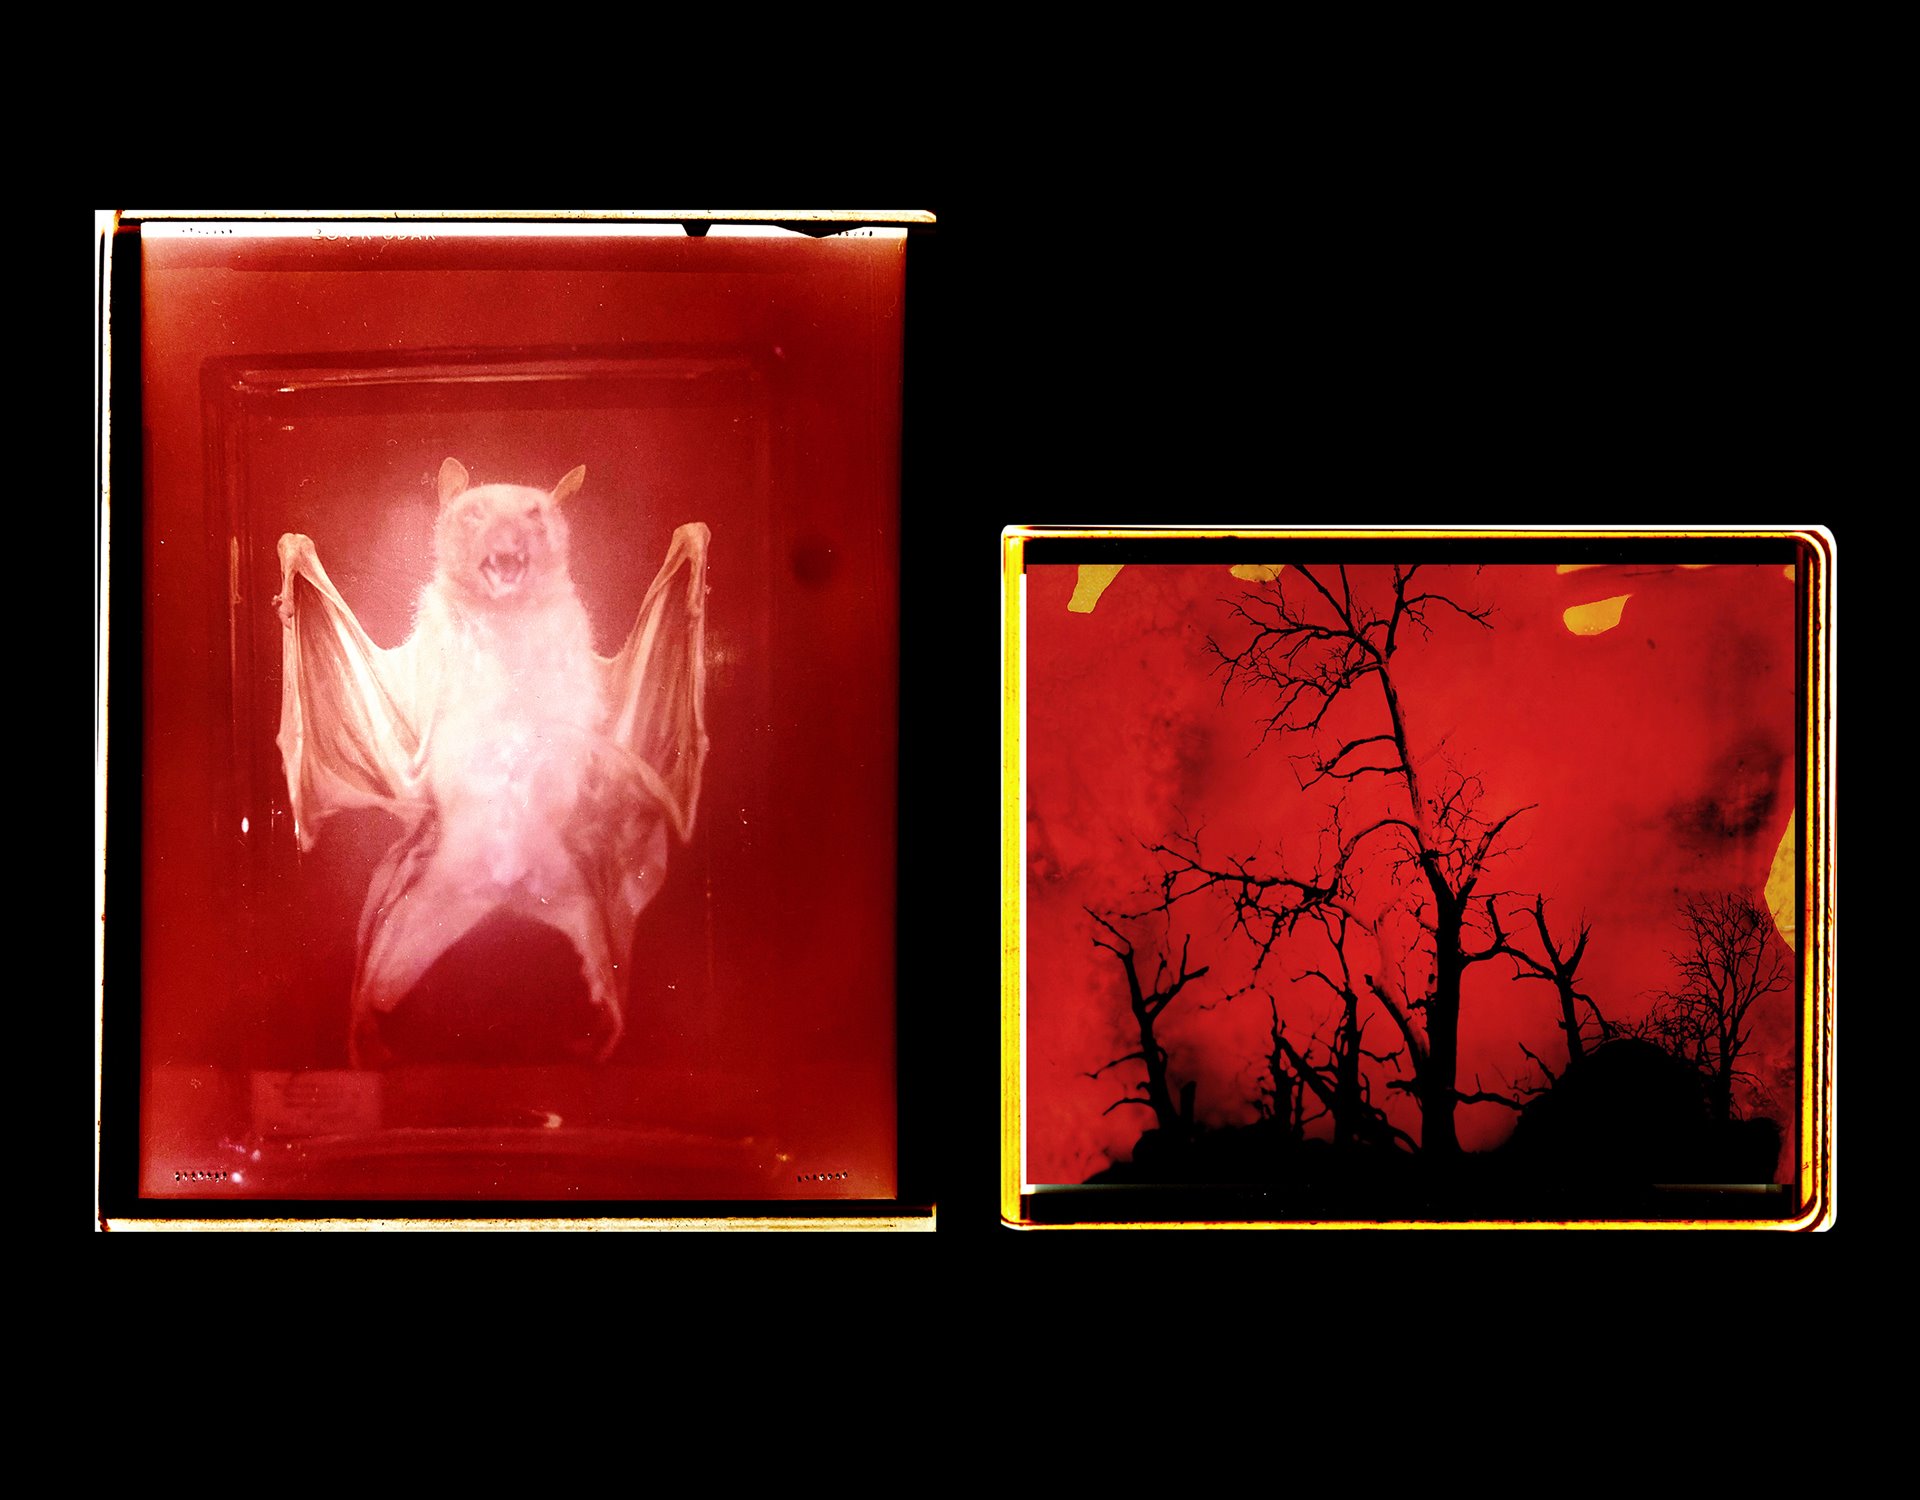 (Left) Preserved specimen of a Bat (Flying fox), UCL Grant Museum of Zoology, London UK. The image was made using a large format camera and hand printed in the colour darkroom by the photographer.<br />
(Right) A landscape of Bathurst (Wiradjuri Country), Australia. This photograph was reworked by painting on the surface of the print with inks and other paints.<br />
&nbsp;